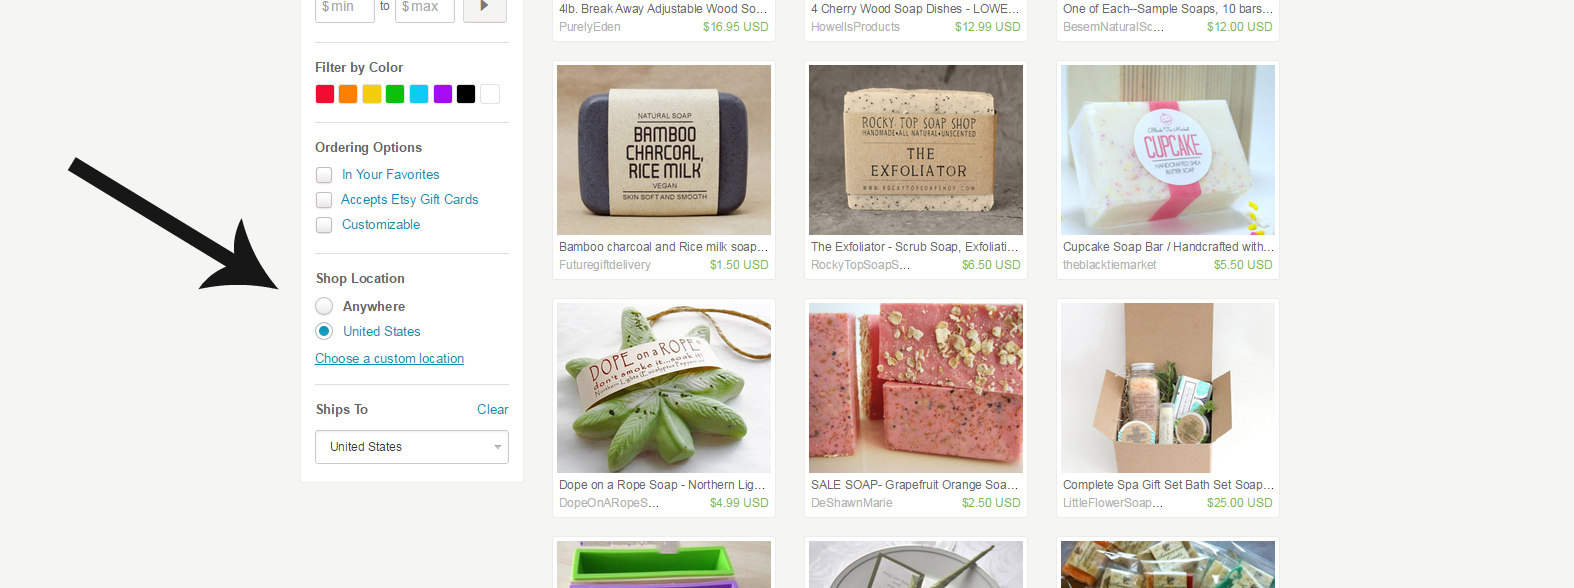 etsy local with arrow